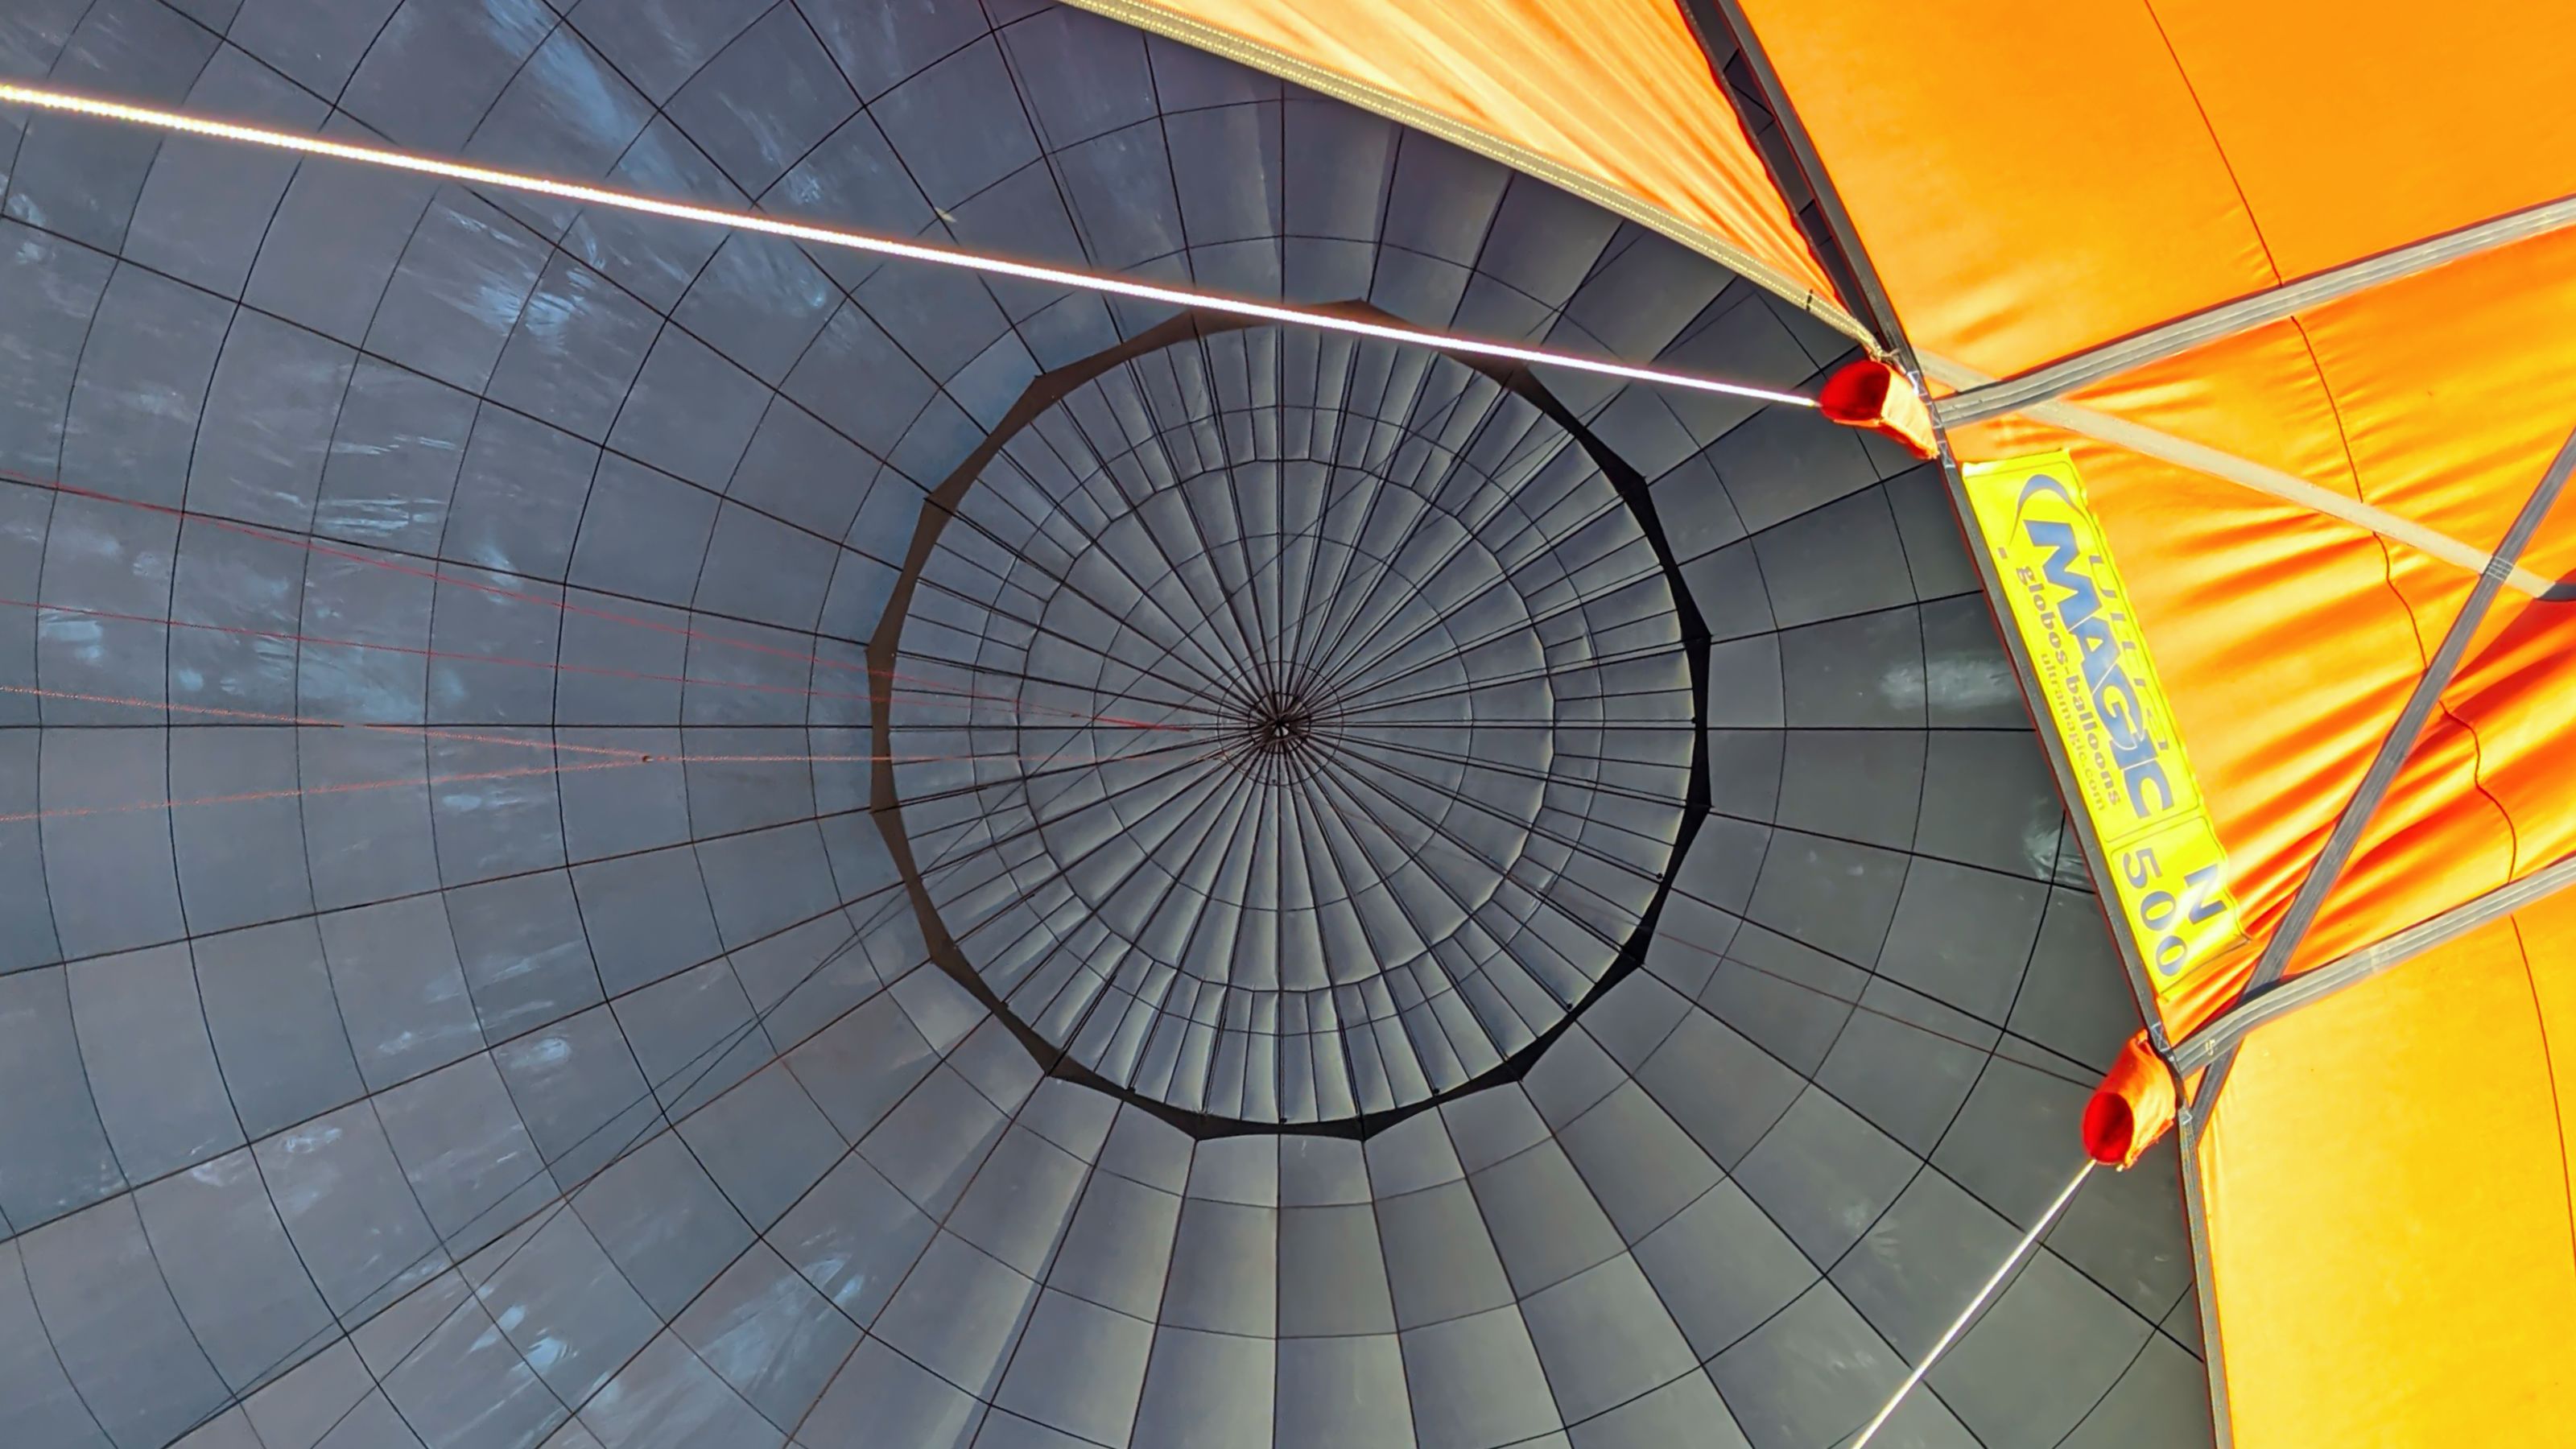 Interior view of a hot air balloon's vent, showcasing the geometric patterns and bright orange fabric.